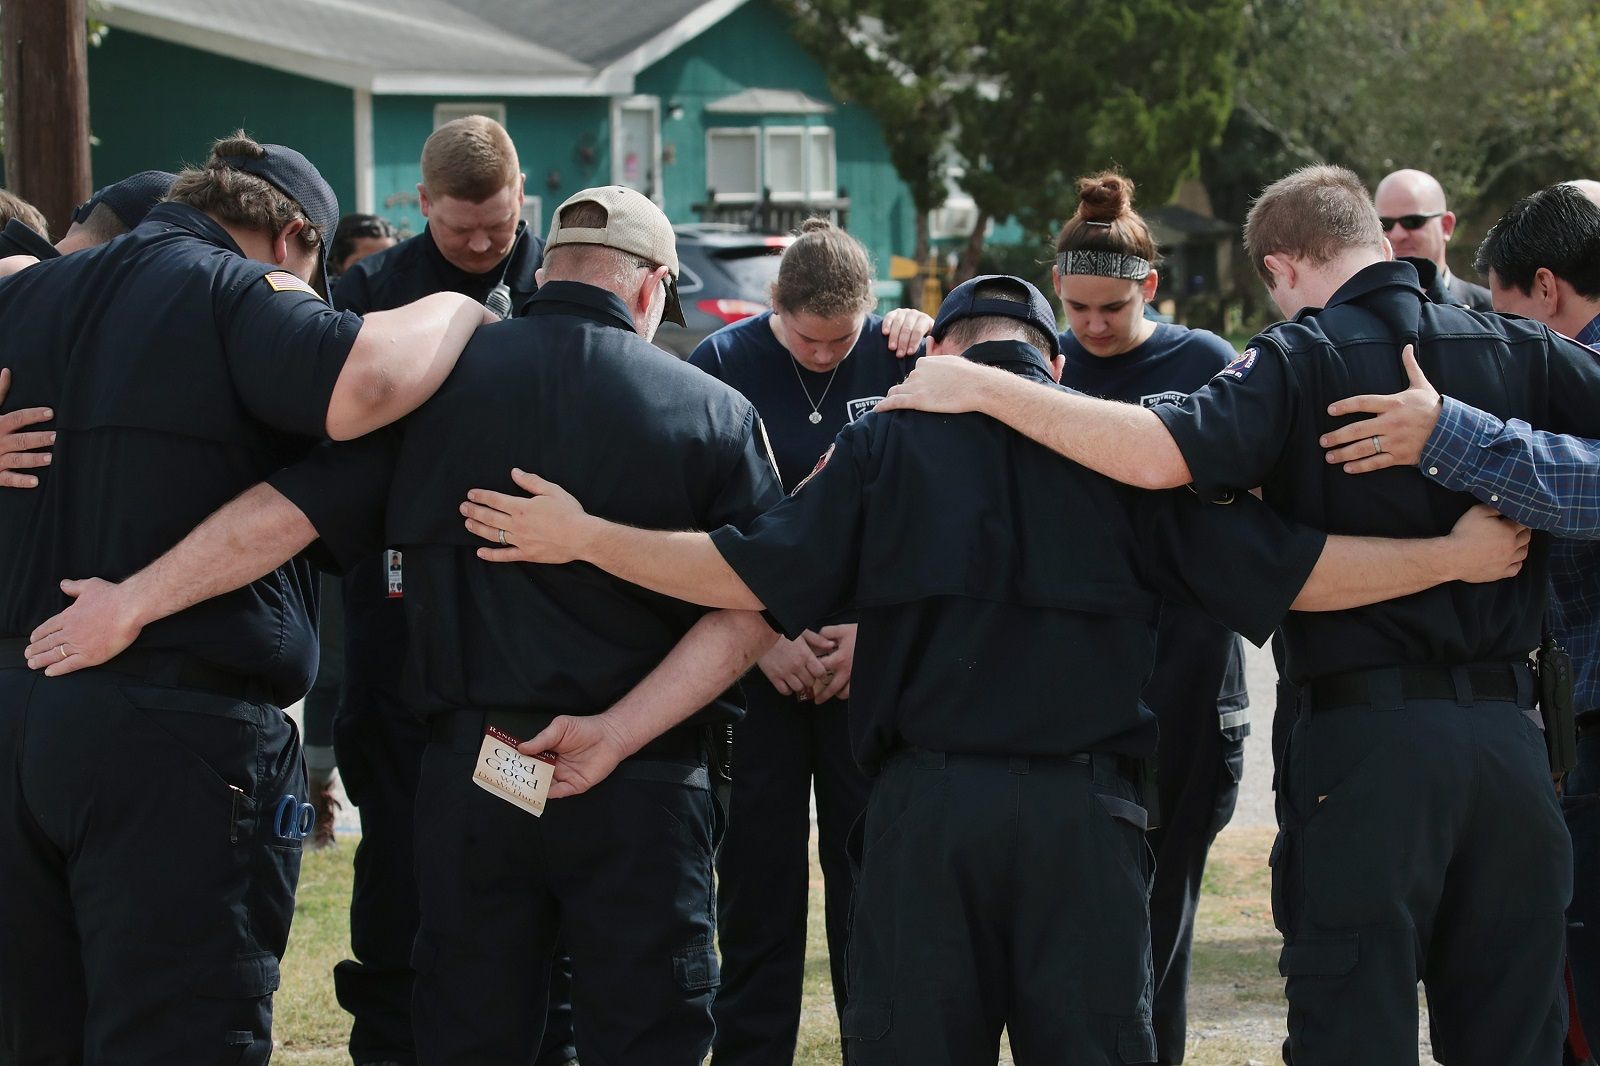 SUTHERLAND SPRINGS, TX - NOVEMBER 11:  First responders share a prayer following a Veterans Day ceremony outside the Community Center on November 11, 2017 in Sutherland Springs, Texas. The men and women were among the first to enter the First Baptist Church of Sutherland Springs to begin treating the wounded following the shooting on November 5. Devin Patrick Kelley shot and killed 26 people and wounded 20 others when he opened fire during Sunday service at the church.  (Photo by Scott Olson/Getty Images)